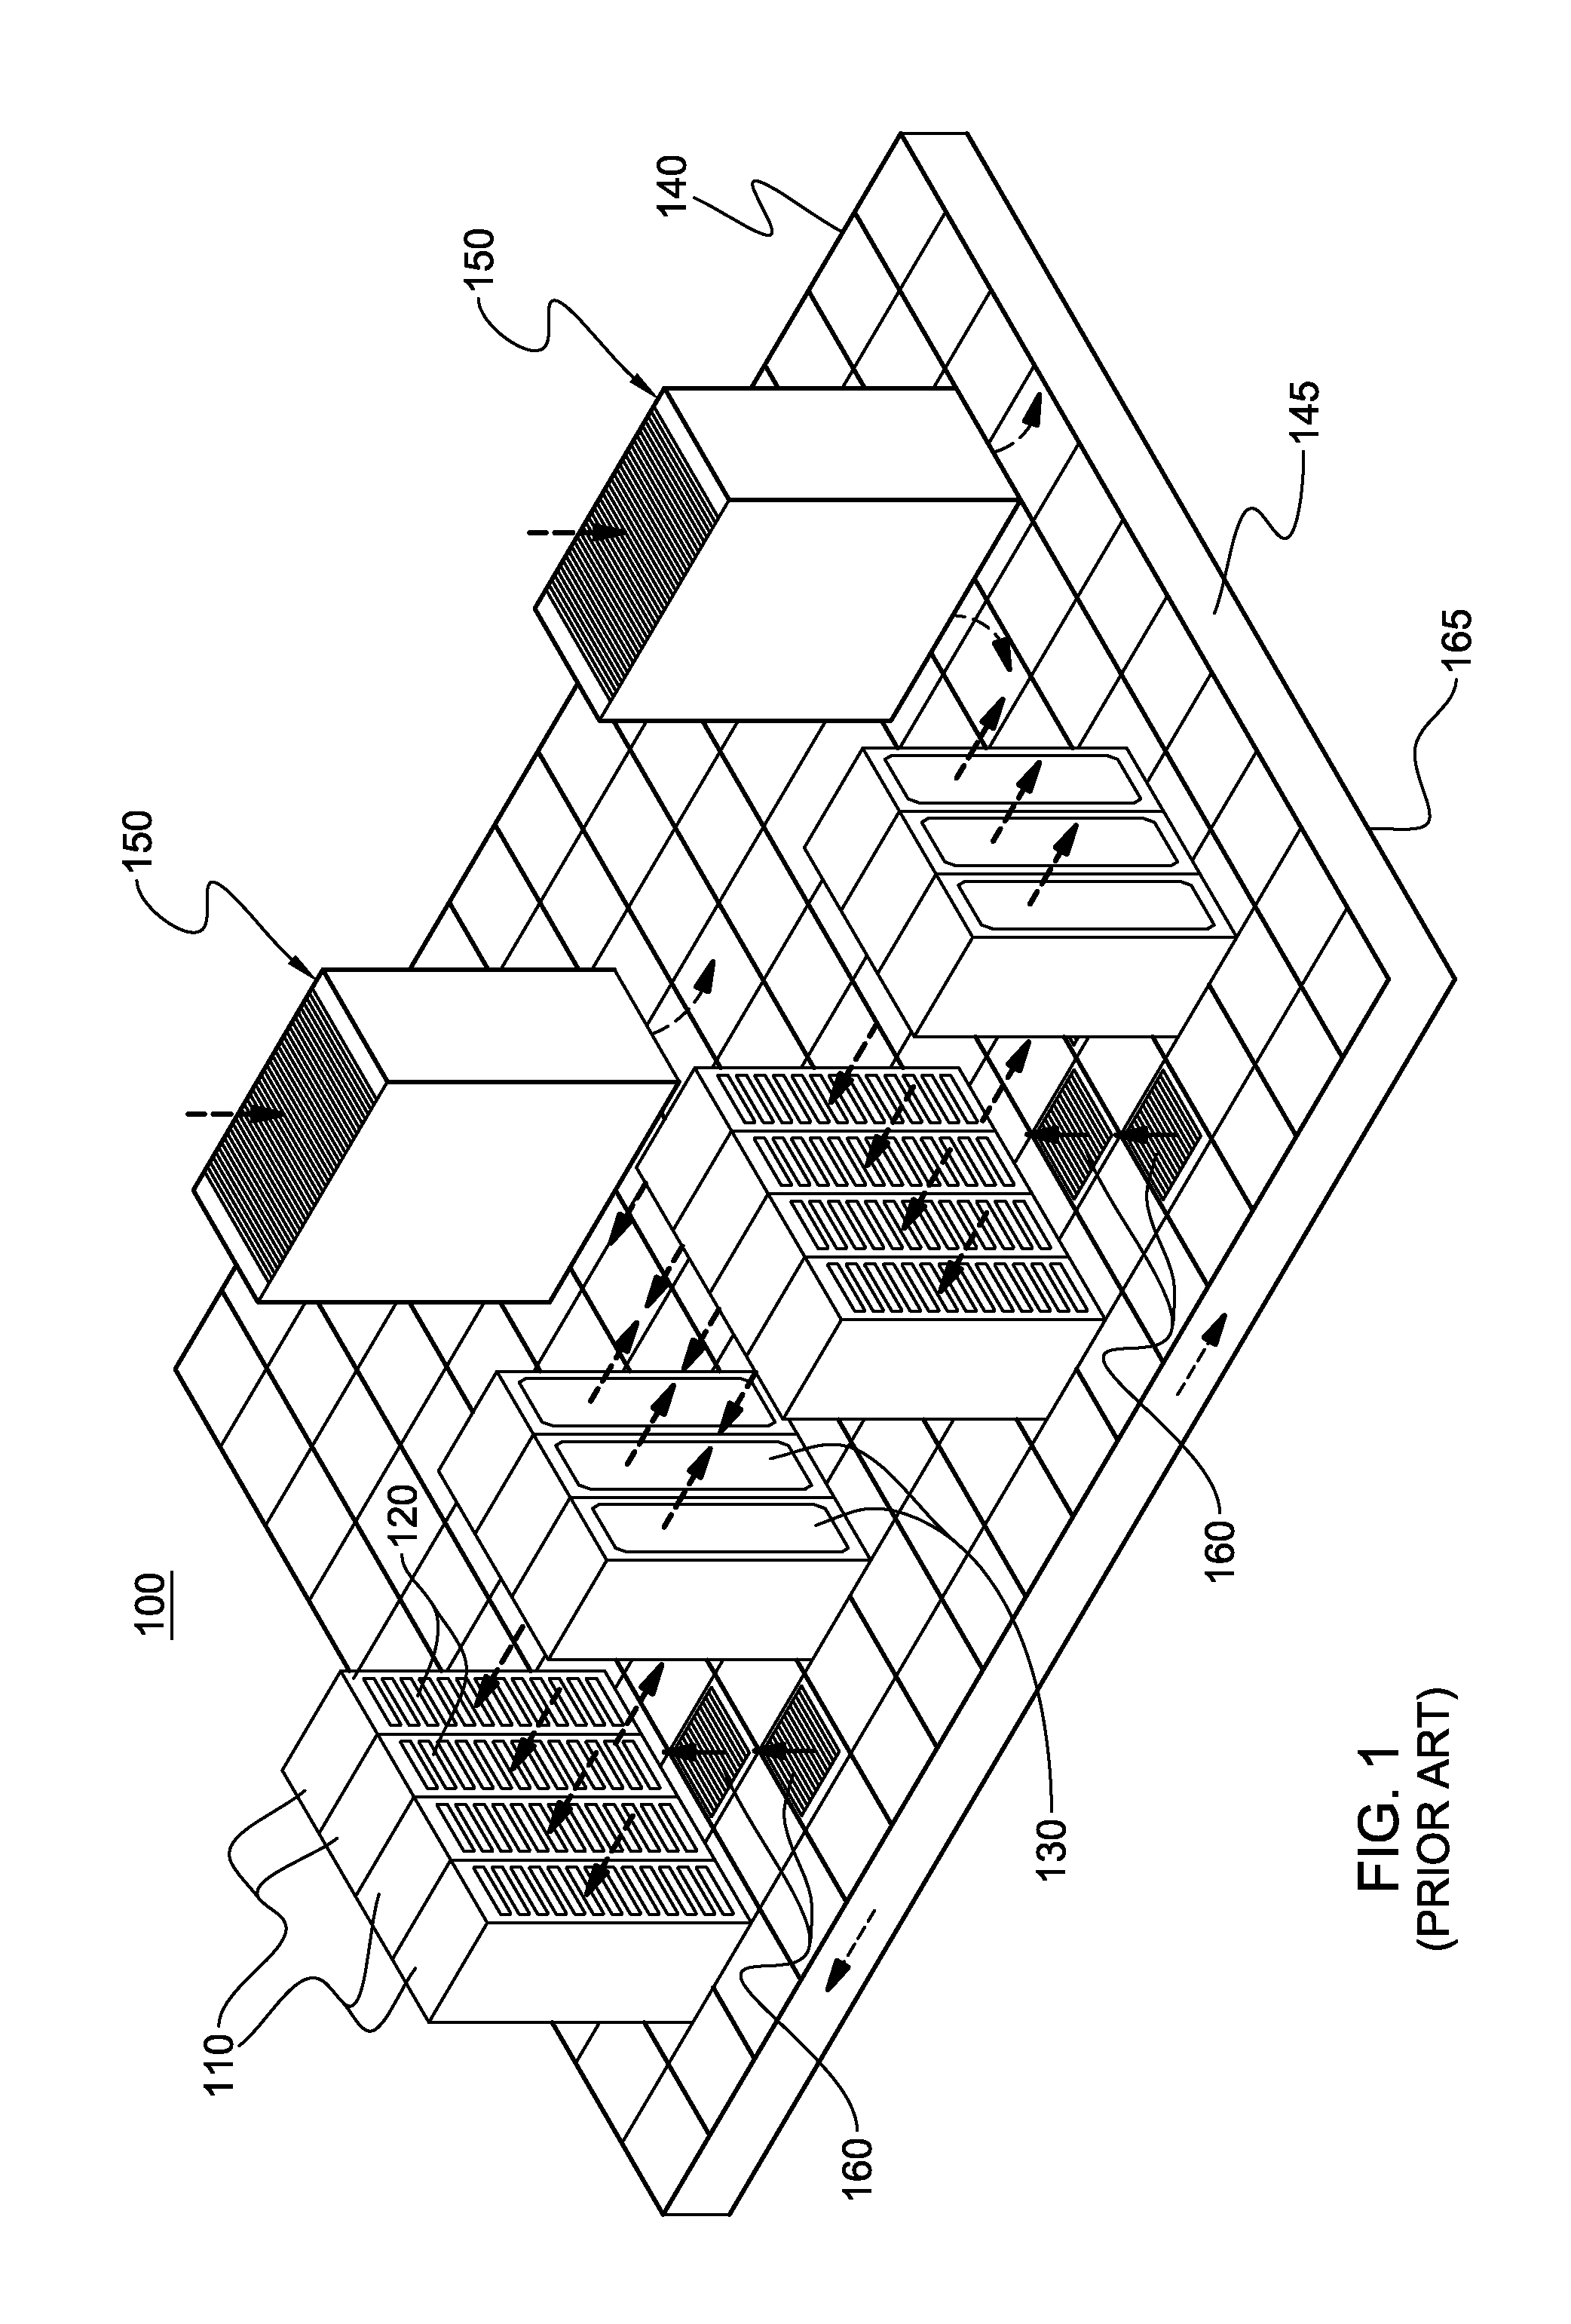 Coolant-cooled heat sink configured for accelerating coolant flow